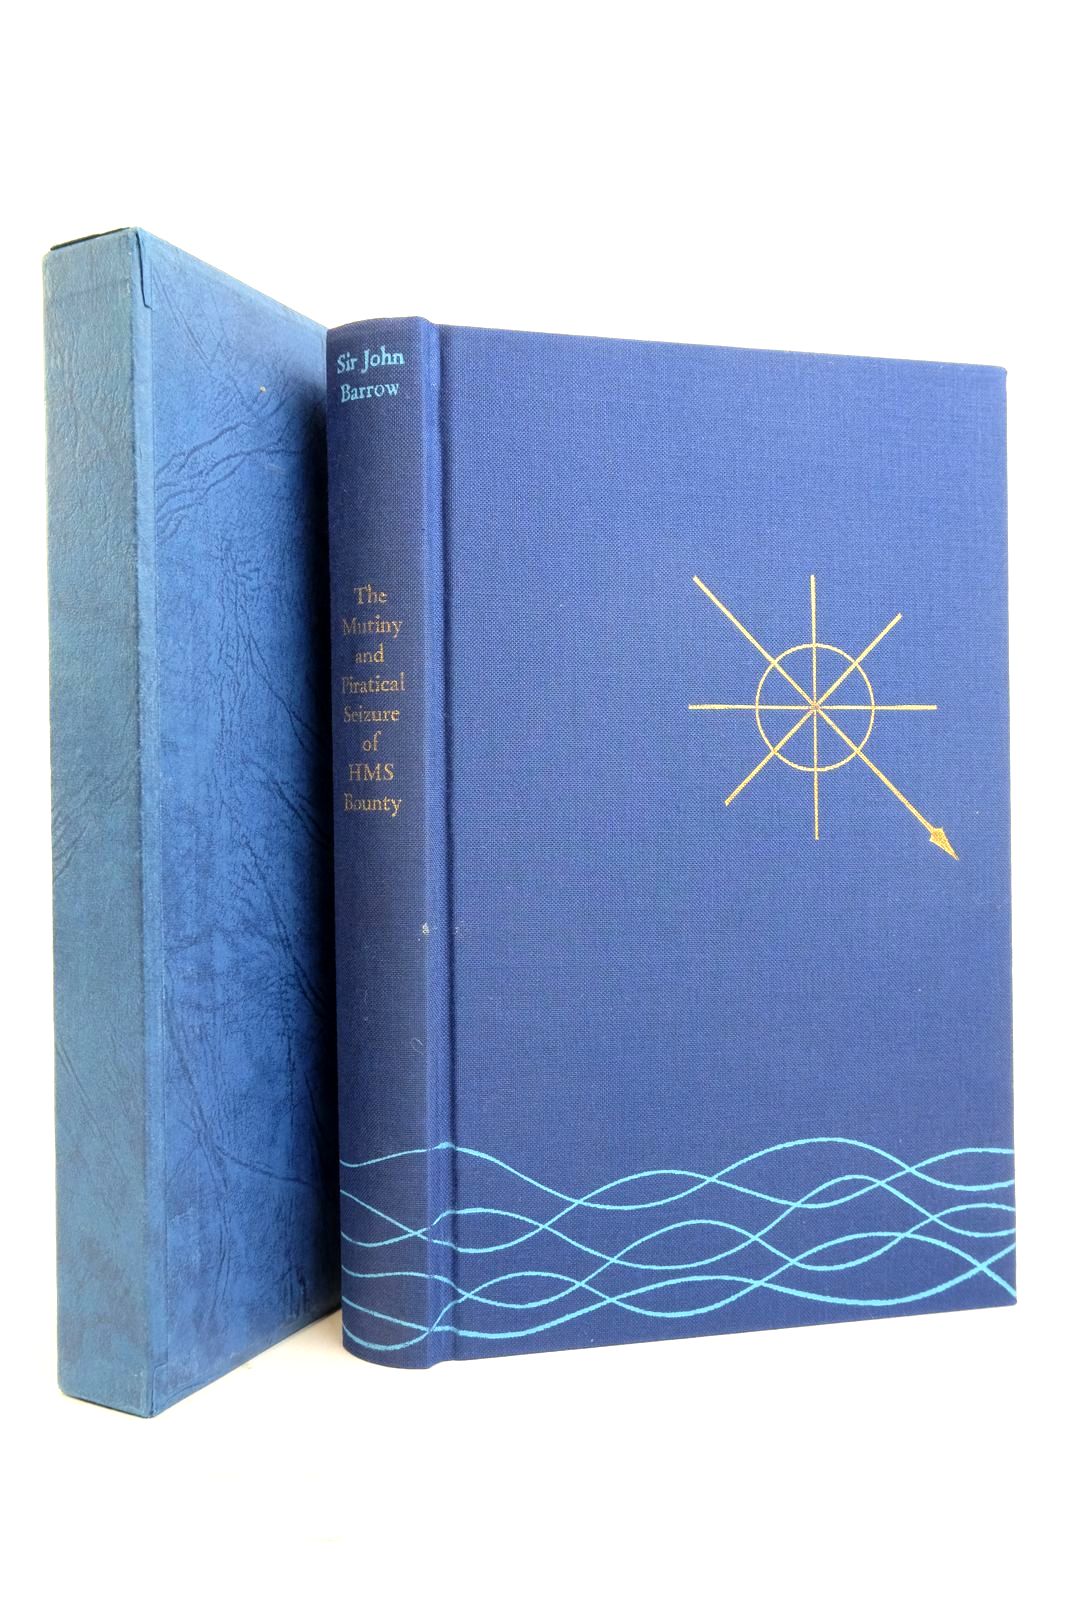 Photo of THE EVENTFUL HISTORY OF THE MUTINY AND PIRATICAL SEIZURE OF HMS BOUNTY ITS CAUSES AND CONSEQUENCES written by Barrow, John Roskill, Stephen W. published by Folio Society (STOCK CODE: 2136507)  for sale by Stella & Rose's Books